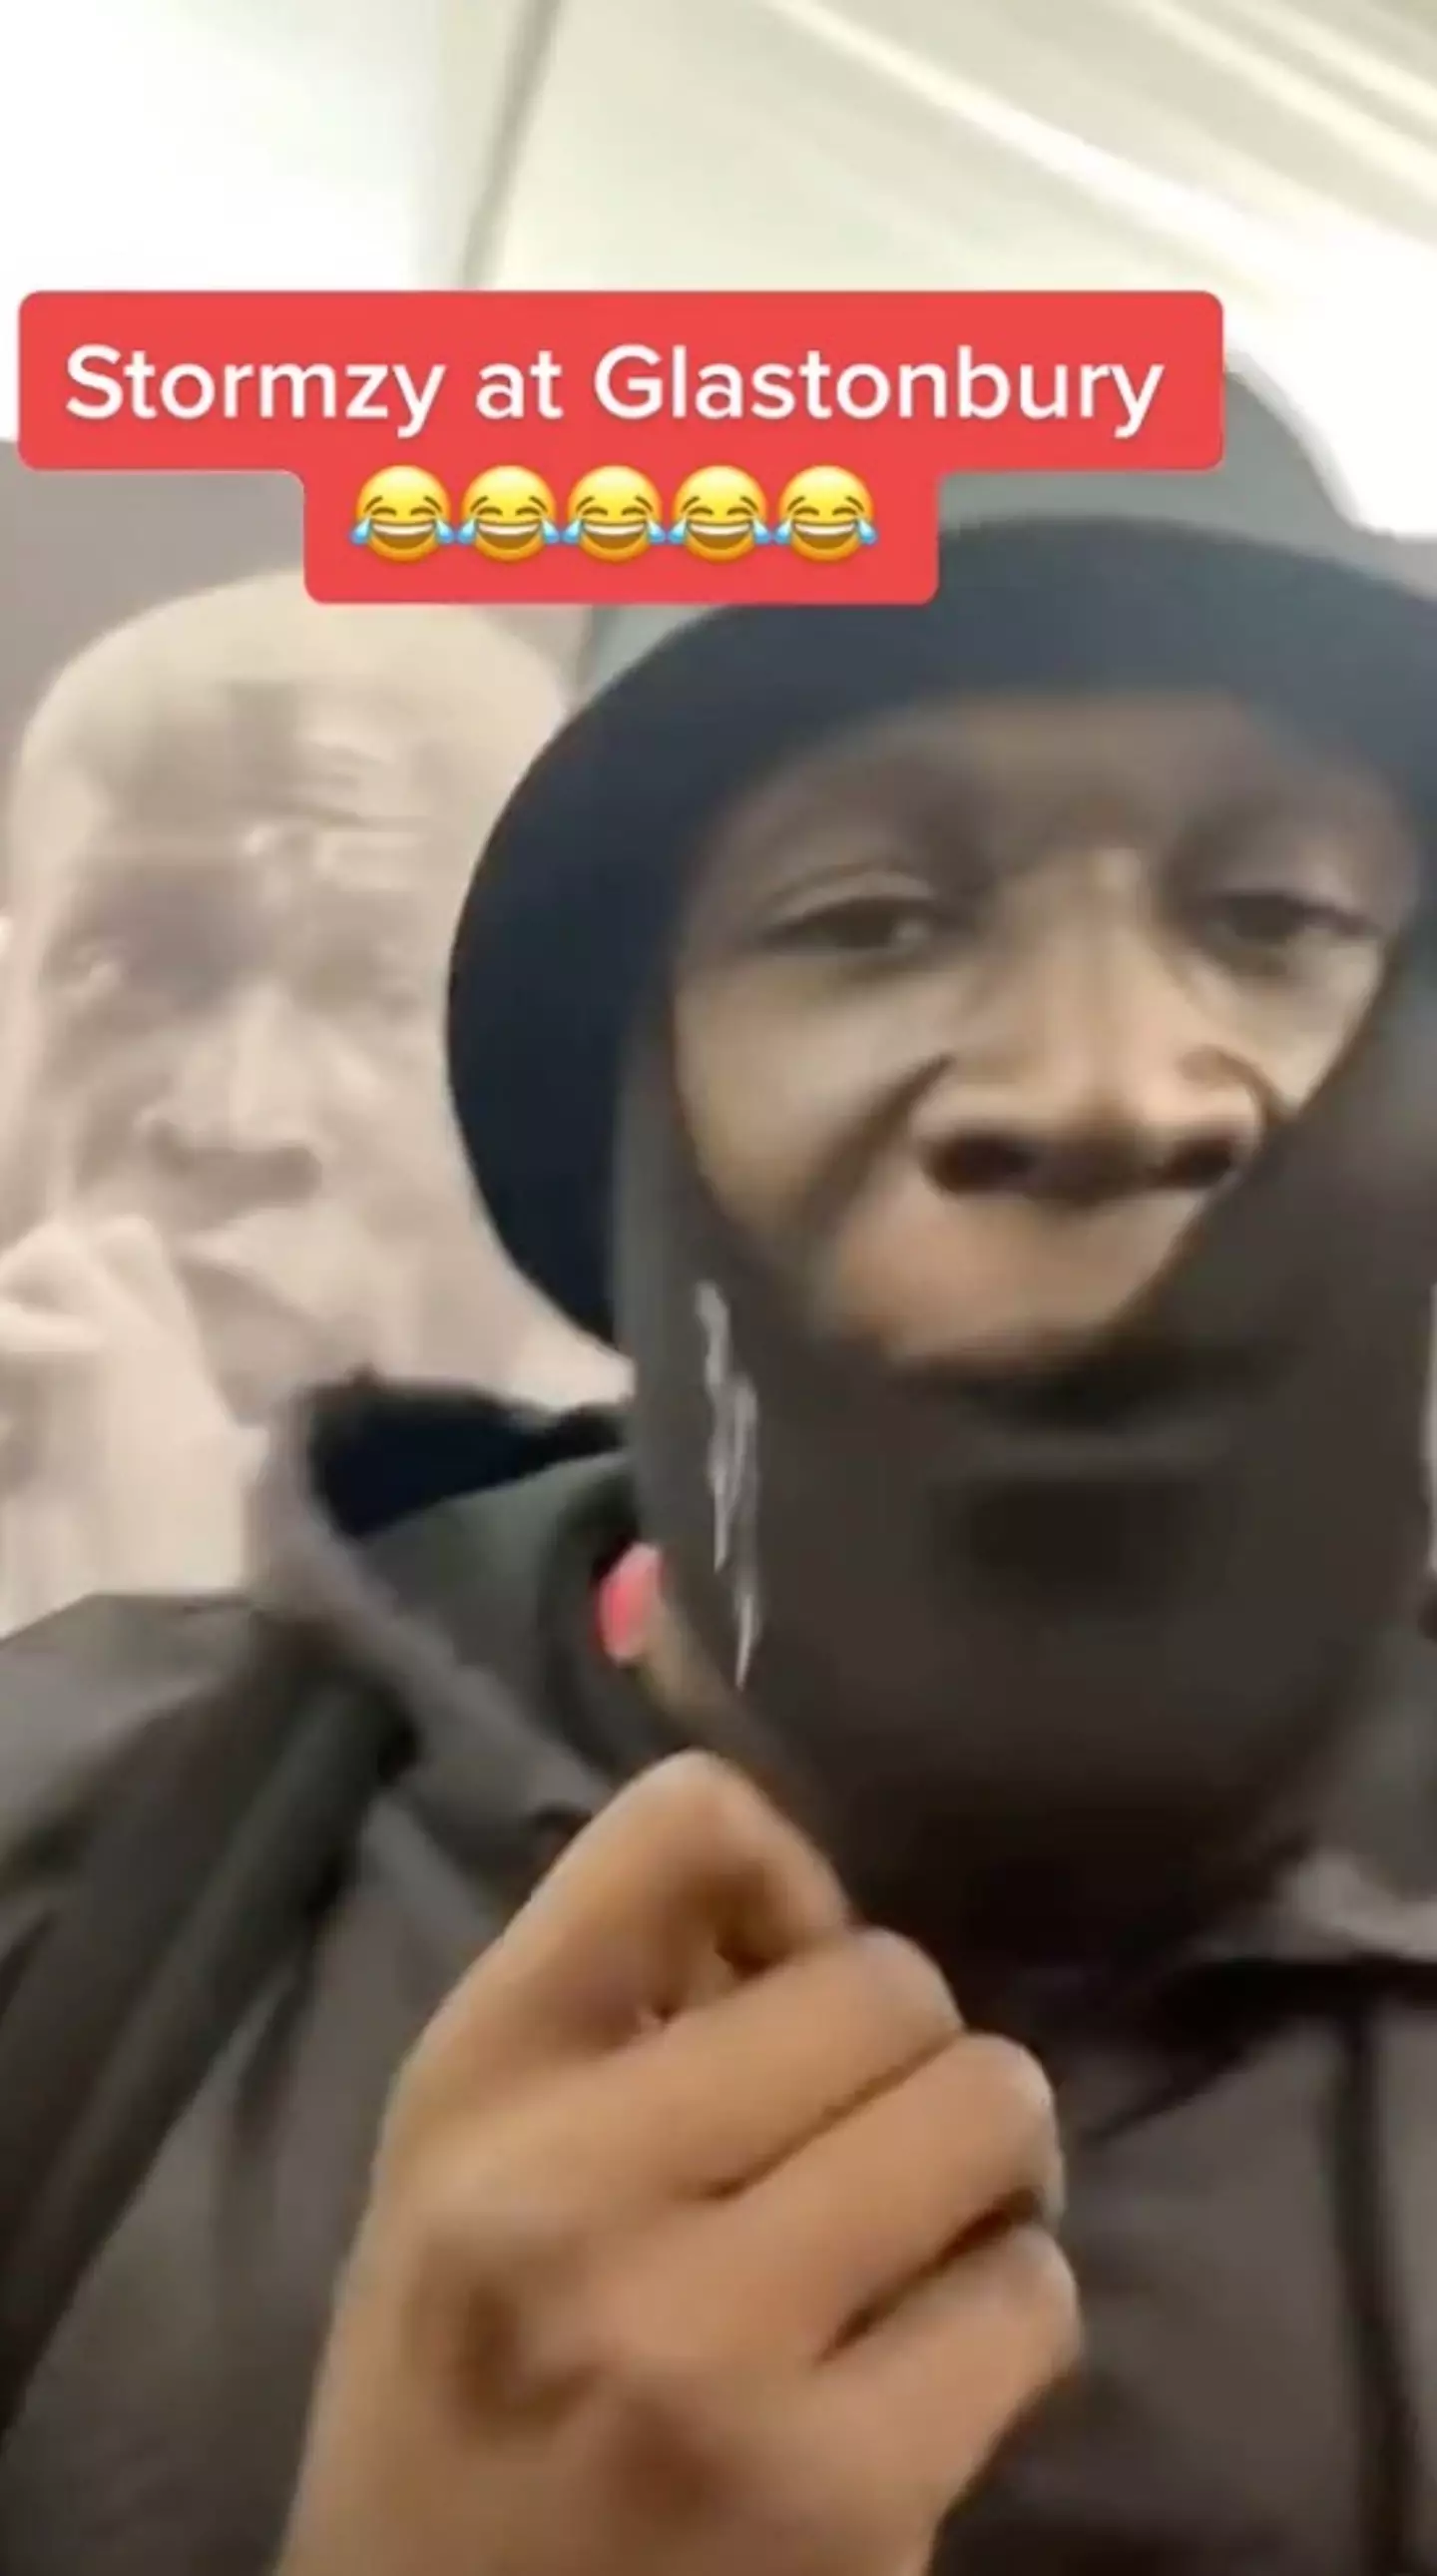 Stormzy secretly went undercover to rave with the crowd at Glastonbury.